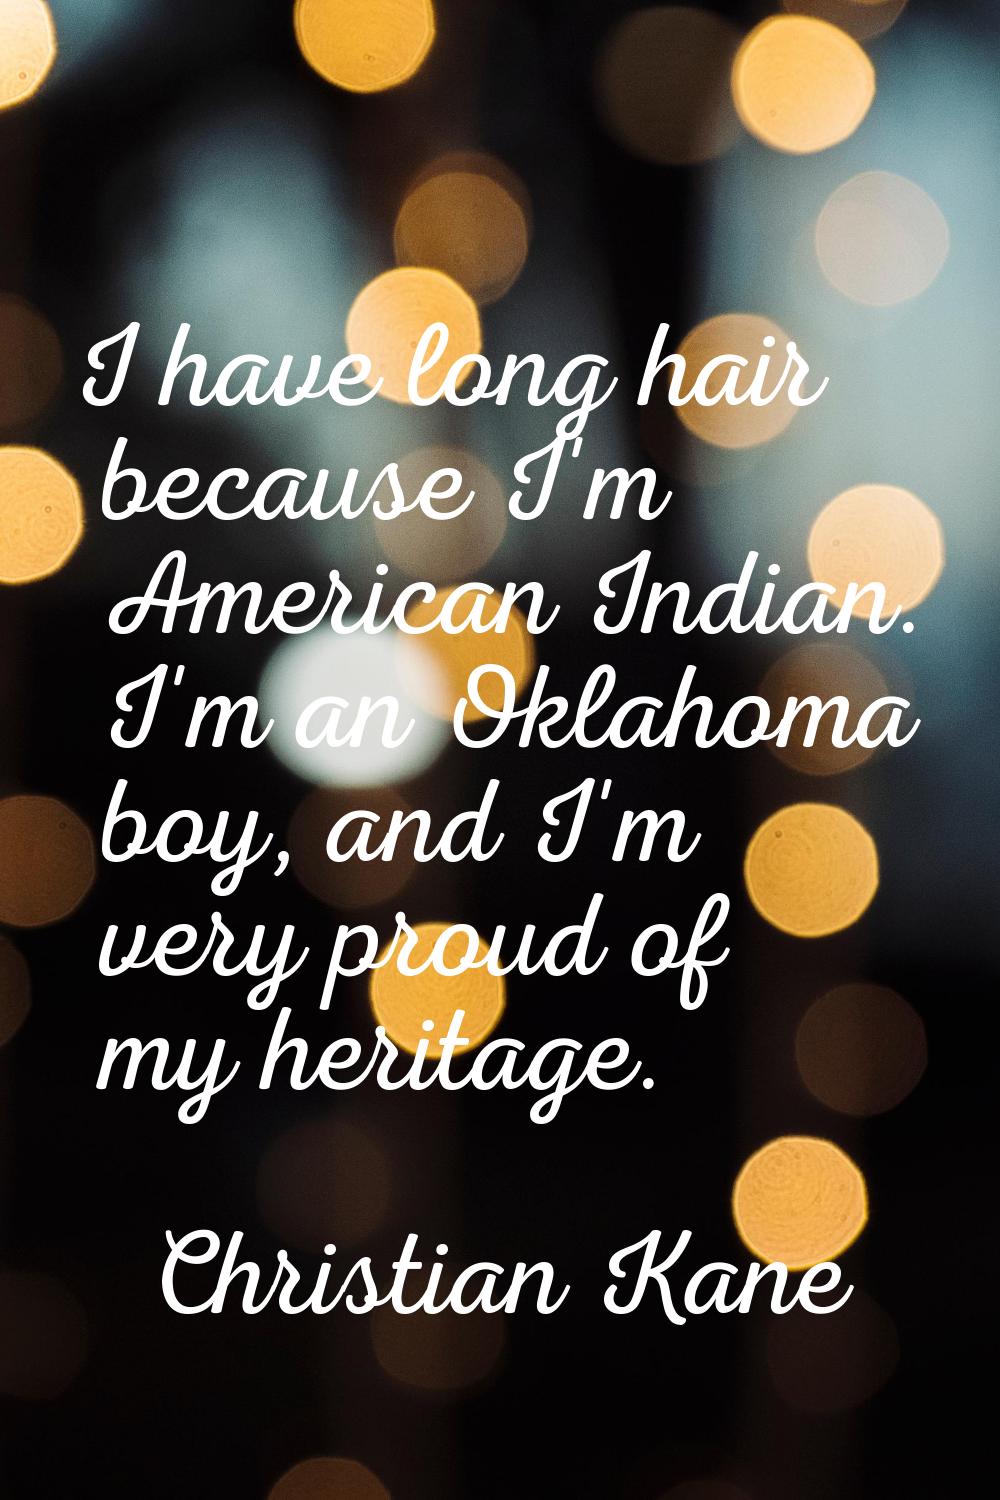 I have long hair because I'm American Indian. I'm an Oklahoma boy, and I'm very proud of my heritag